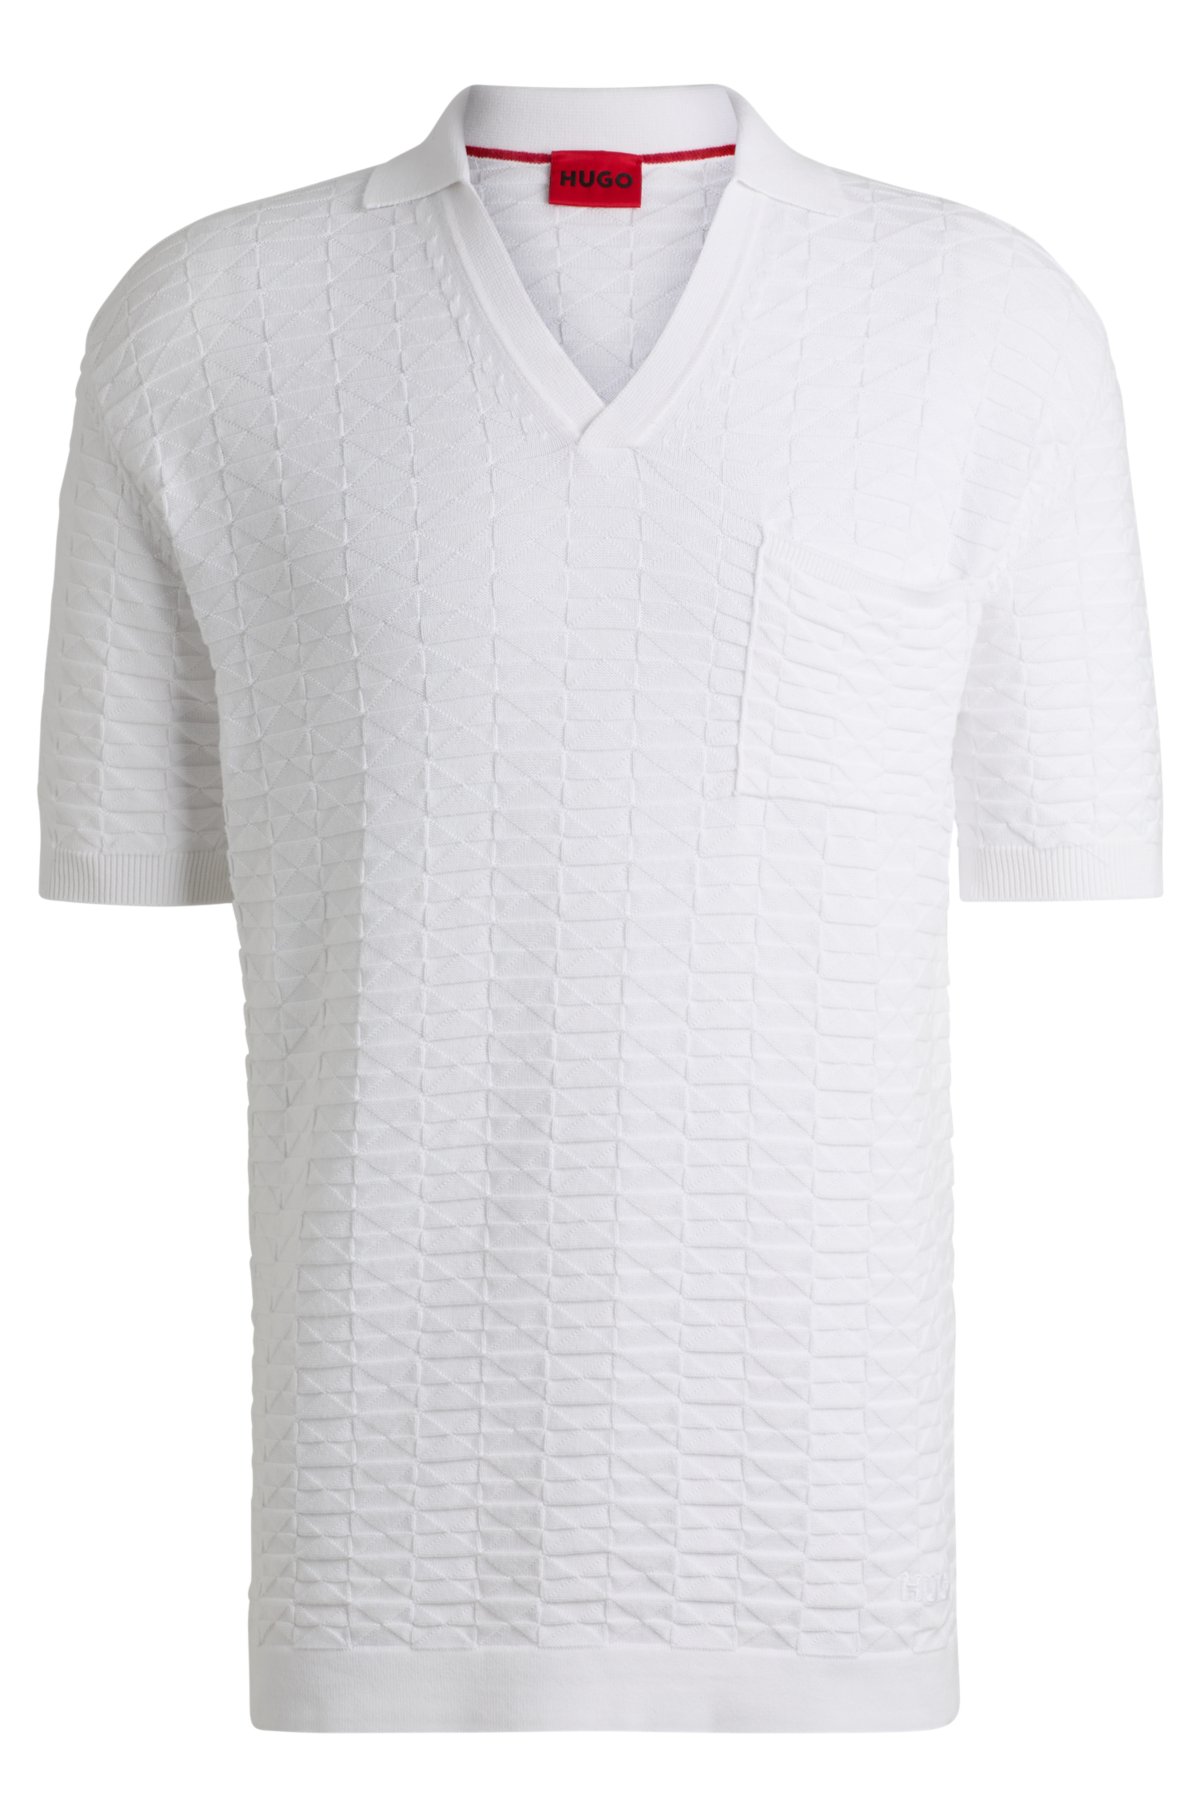 Cotton sweater in knitted jacquard with Johnny collar, White